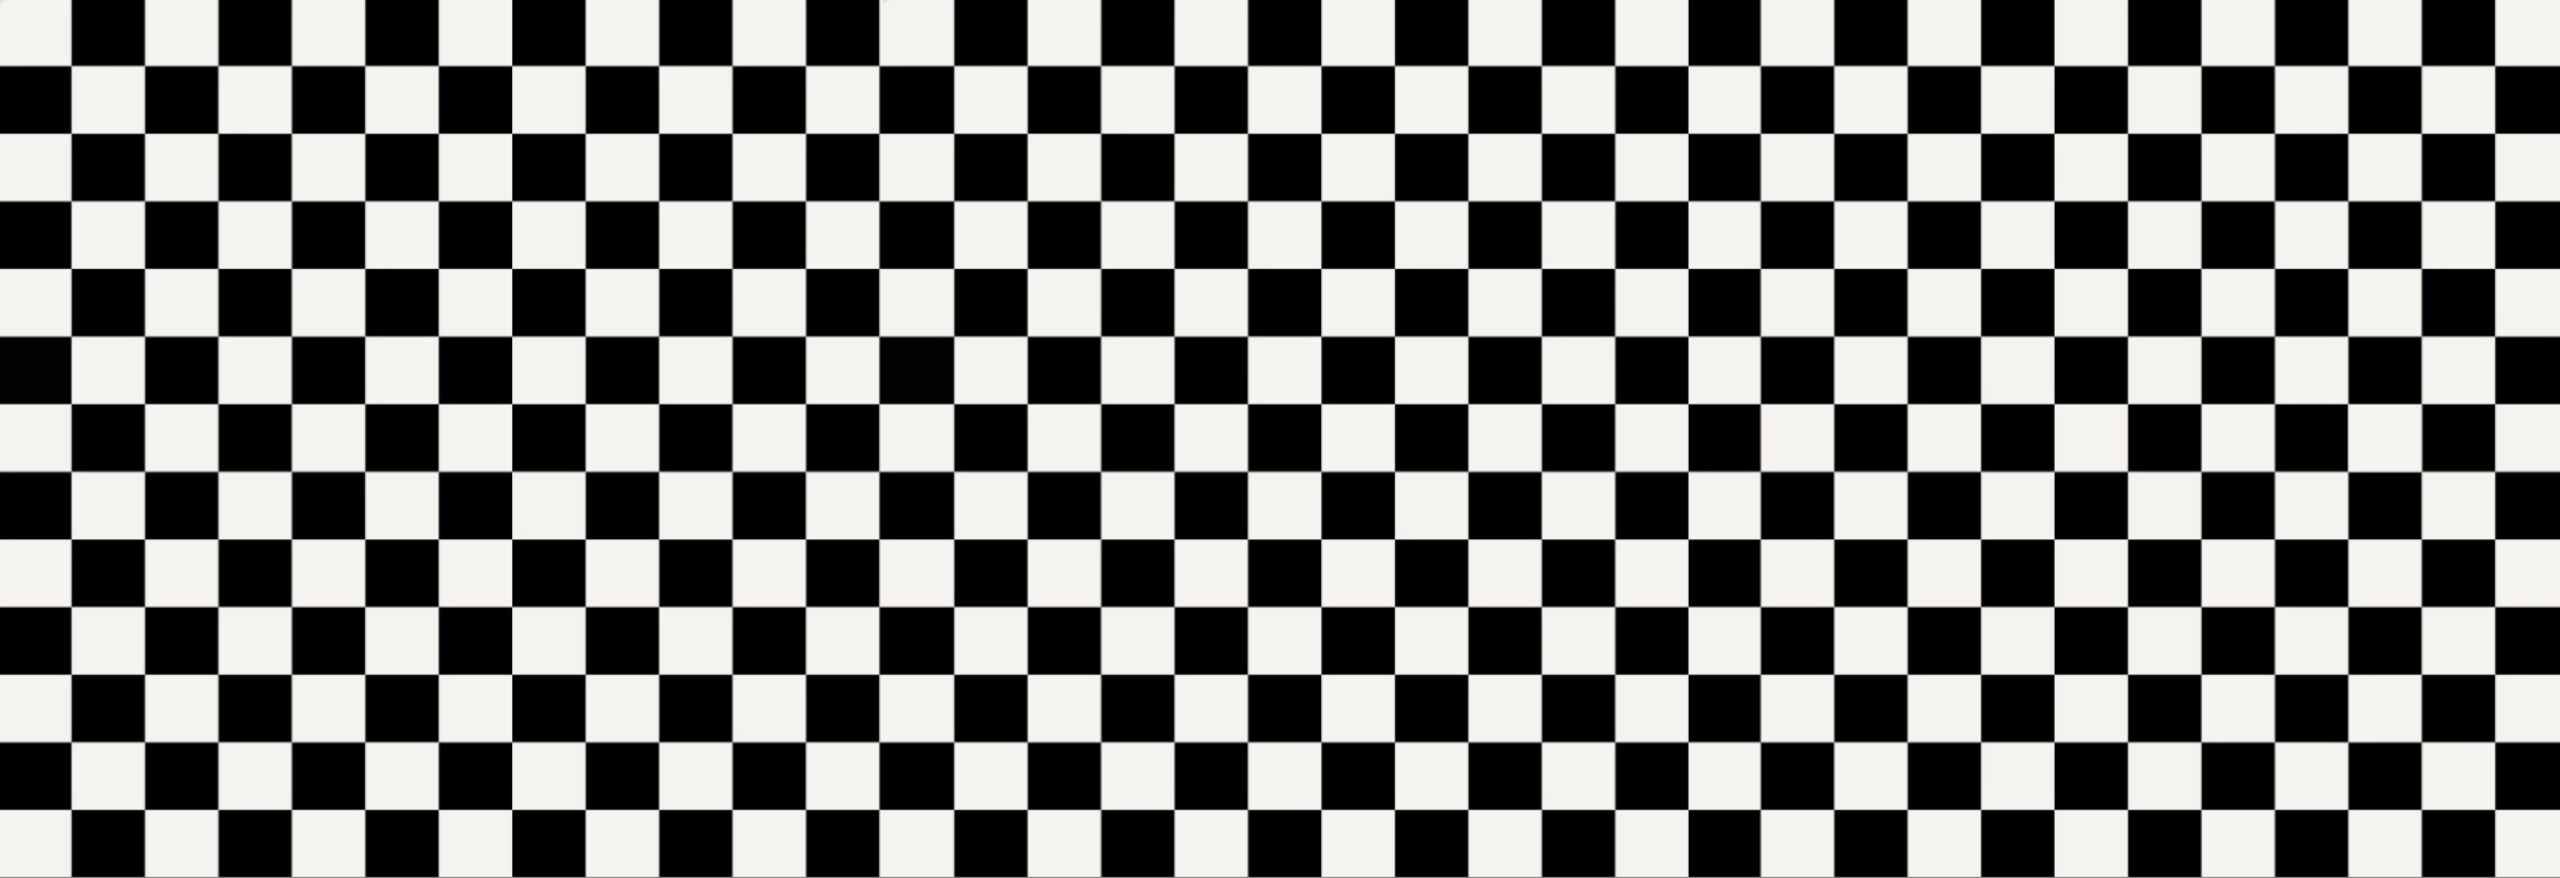 Checkered_Footer2